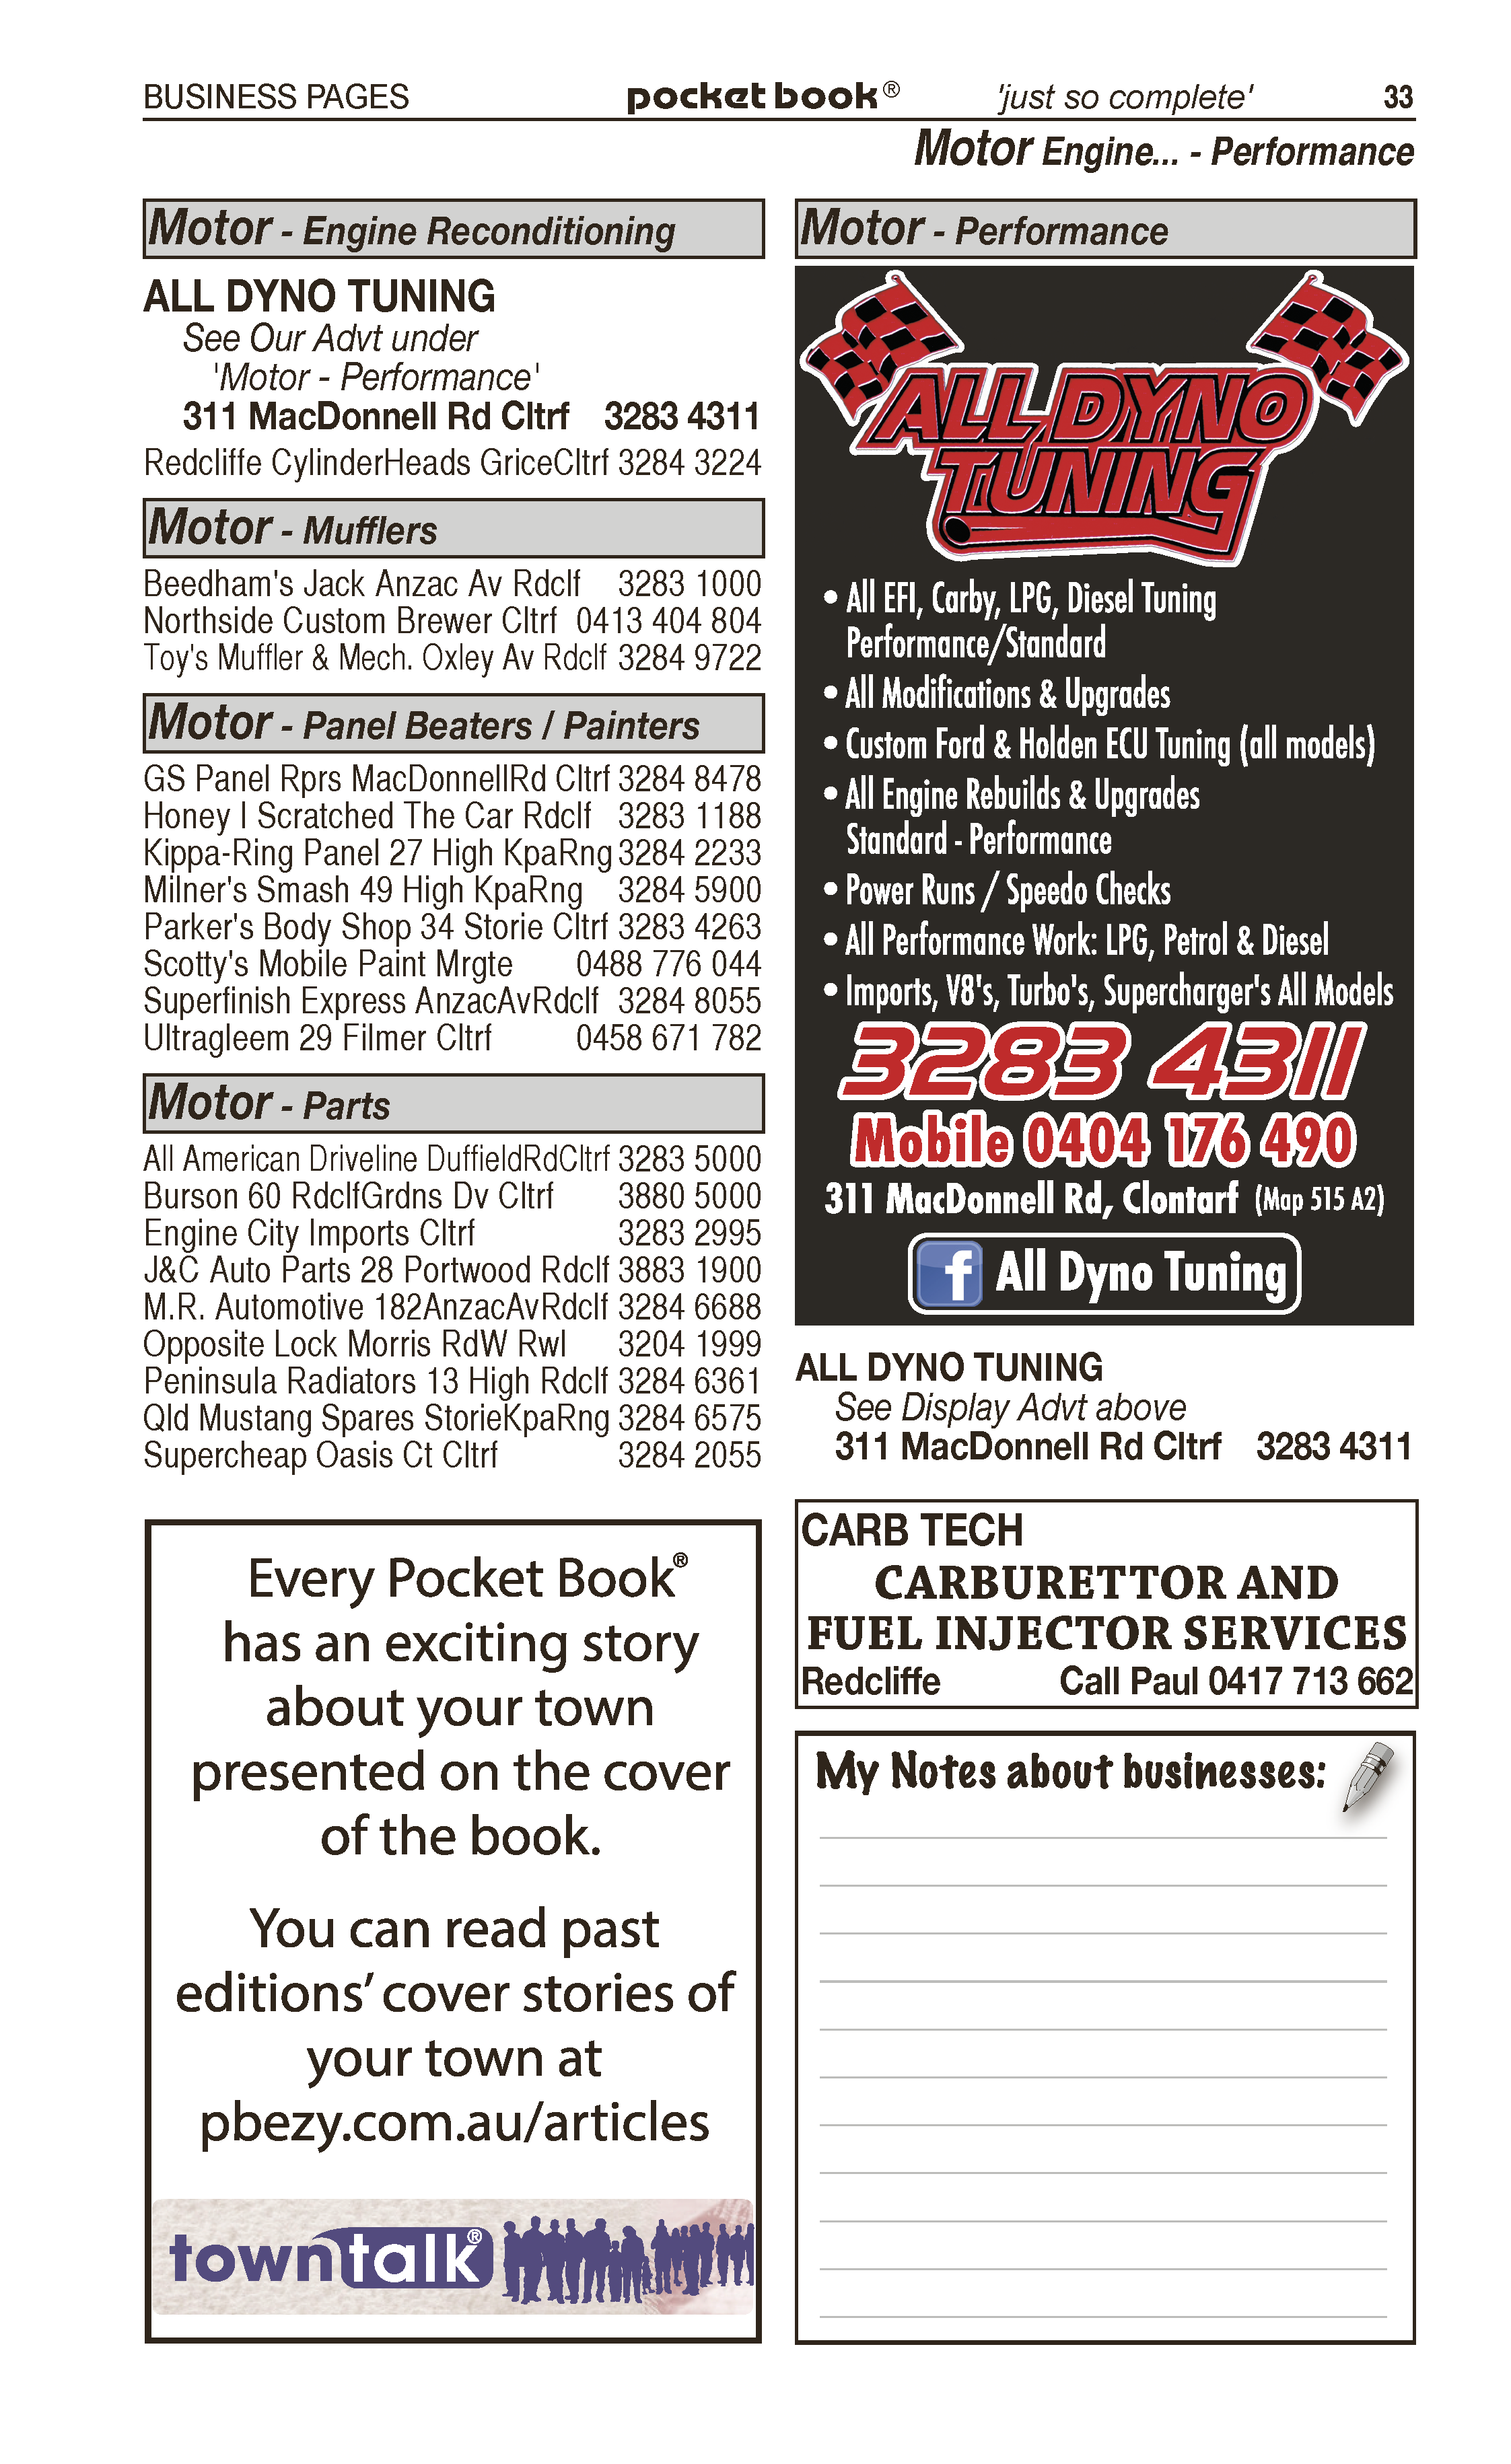 All Dyno Tuning | Motor – Engine Reconditioning in Clontarf | PBezy Pocket Books local directories - page 33